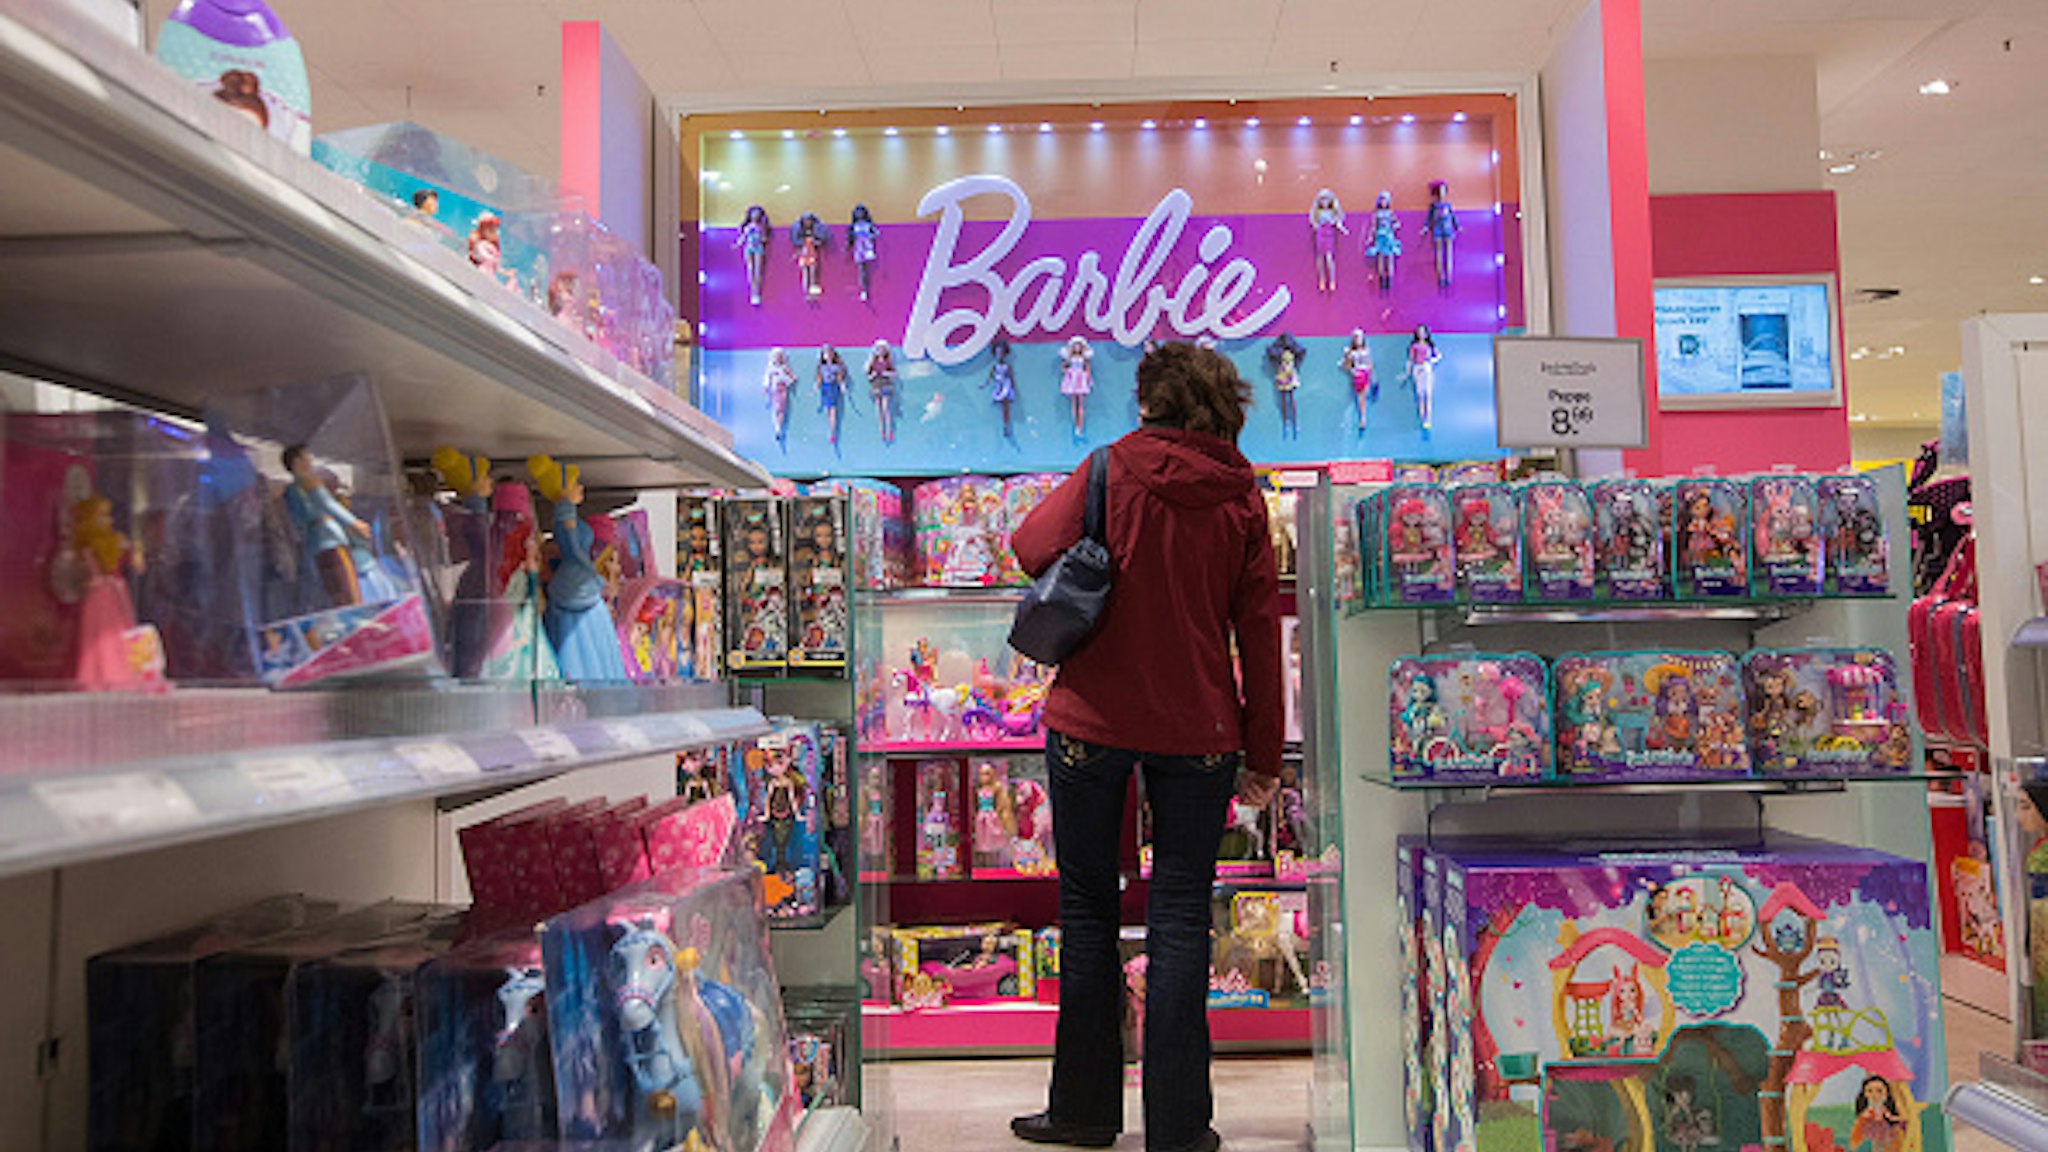 A customer stands beside a Barbie toy doll display inside a Galeria Kaufhof department store, operated by Hudson's Bay Co., in Berlin, Germany, on Wednesday, Dec. 6, 2017. Austrian property developer Rene Benko is taking a second run at consolidating Germany's dusty department stores, making an unsolicited bid for the Kaufhof chain now owned by Toronto-based Hudson's Bay.